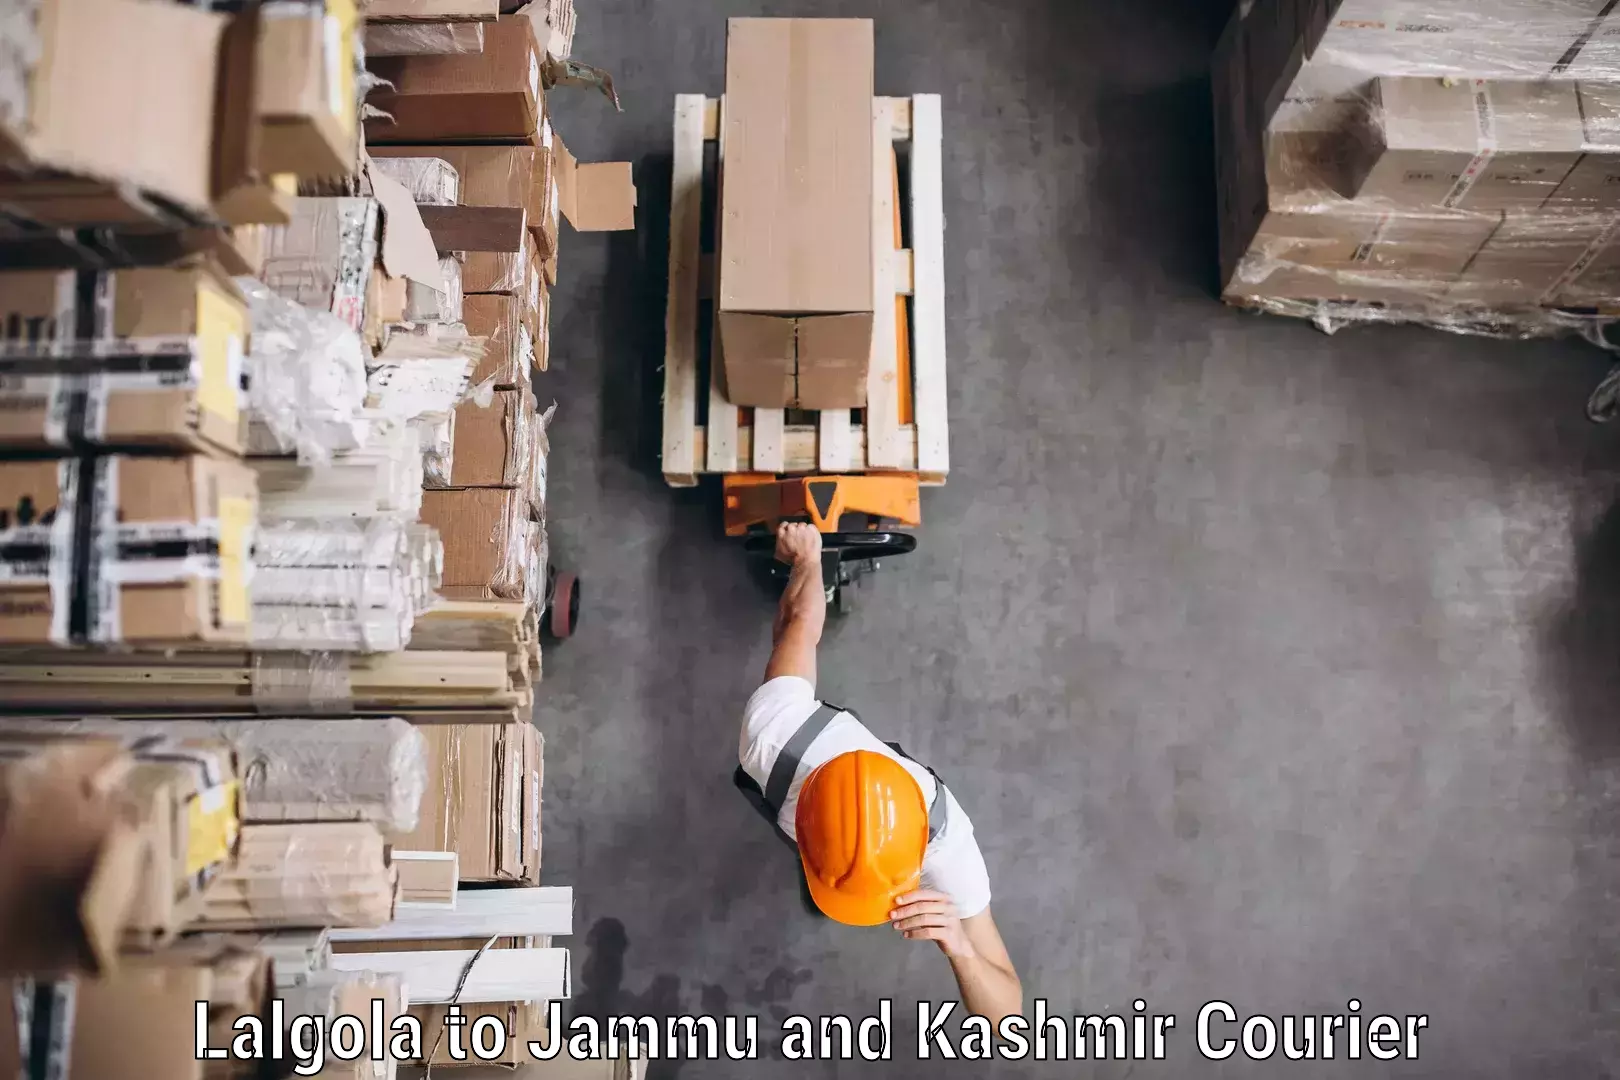 Discount courier rates in Lalgola to Jammu and Kashmir